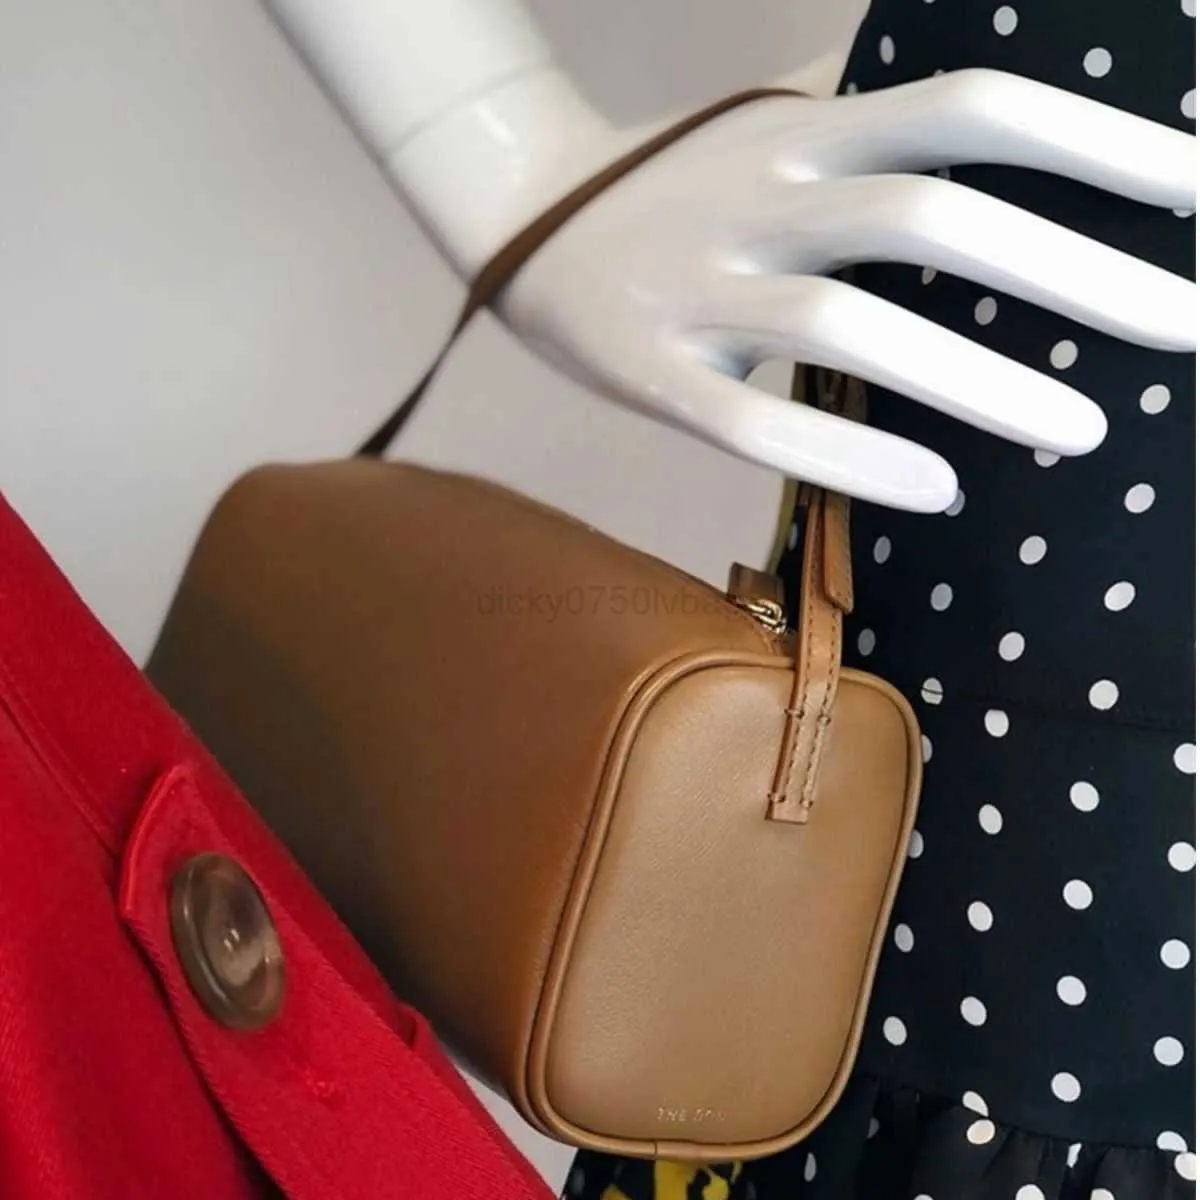 High Quality Genuine Leather Handbag Pencil Case For Women Small Design  Underarm Handheld Cylinder The Row90s From Dicky0750lvbag, $80.97